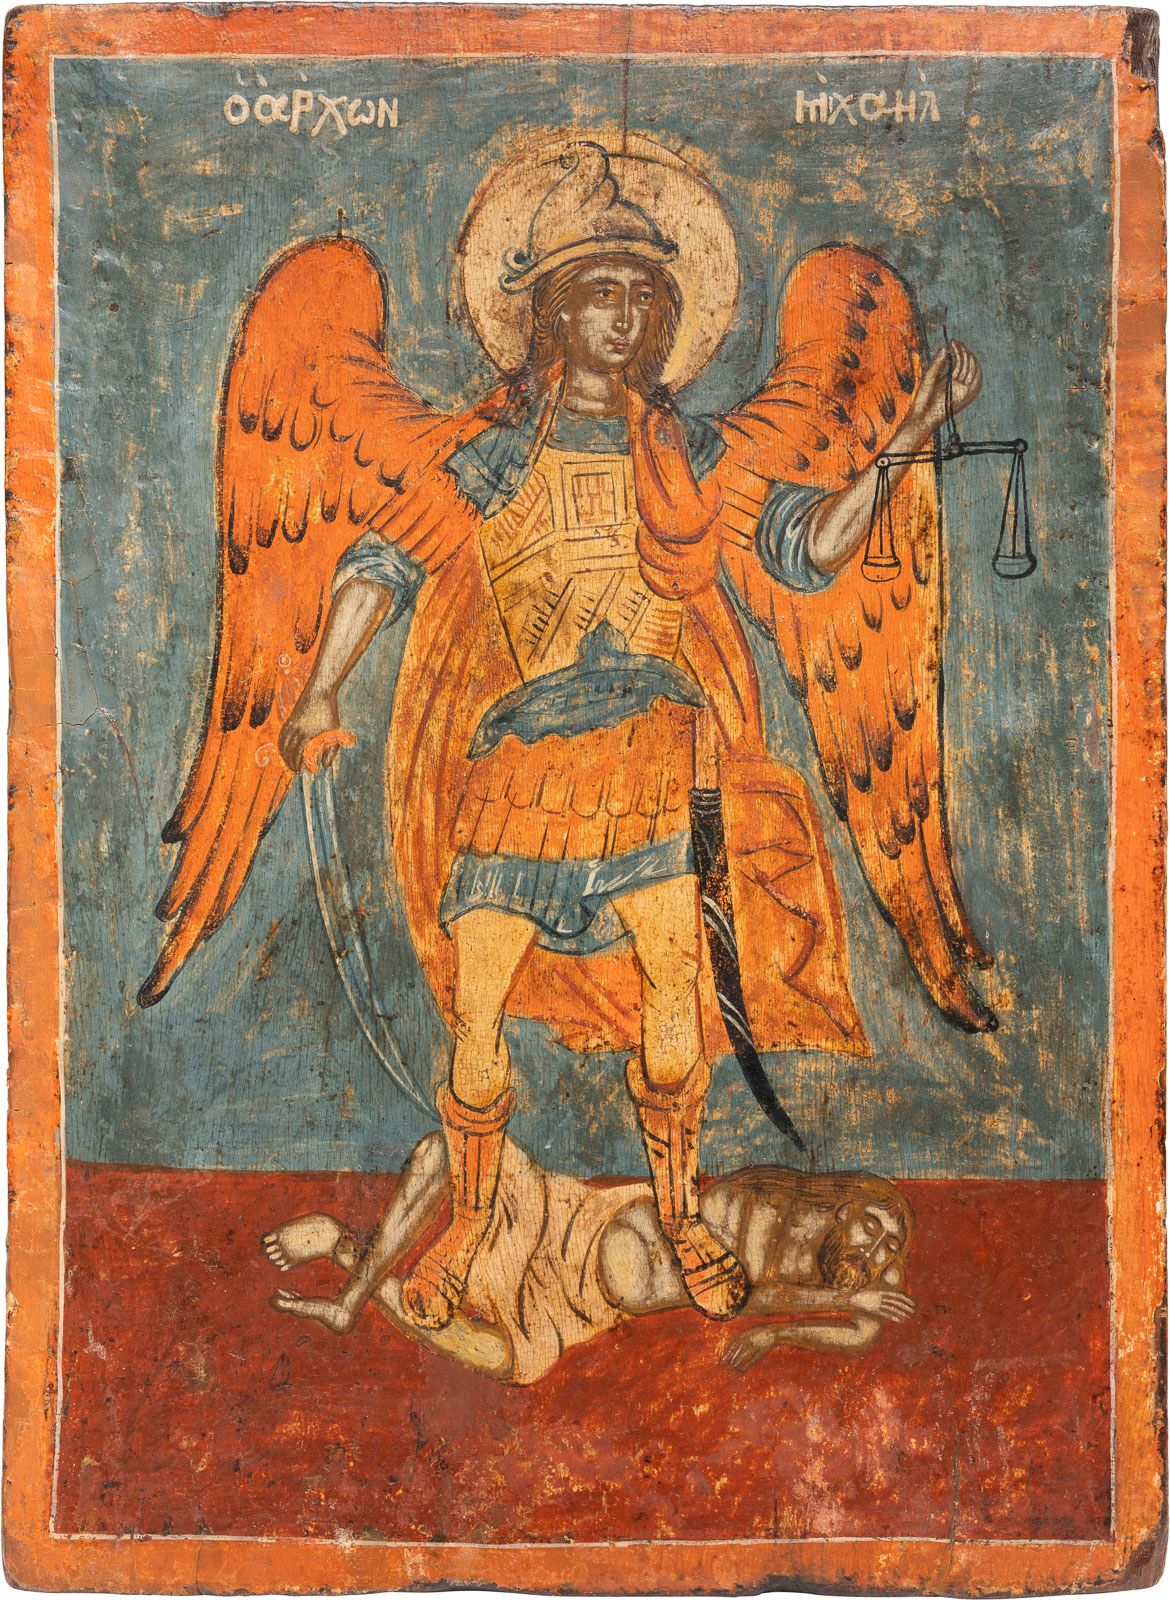 AN ICON SHOWING THE ARCHANGEL MICHAEL AS PSYCHOPOMP ICONA CHE MOSTRA L'ARCANGELO&hellip;